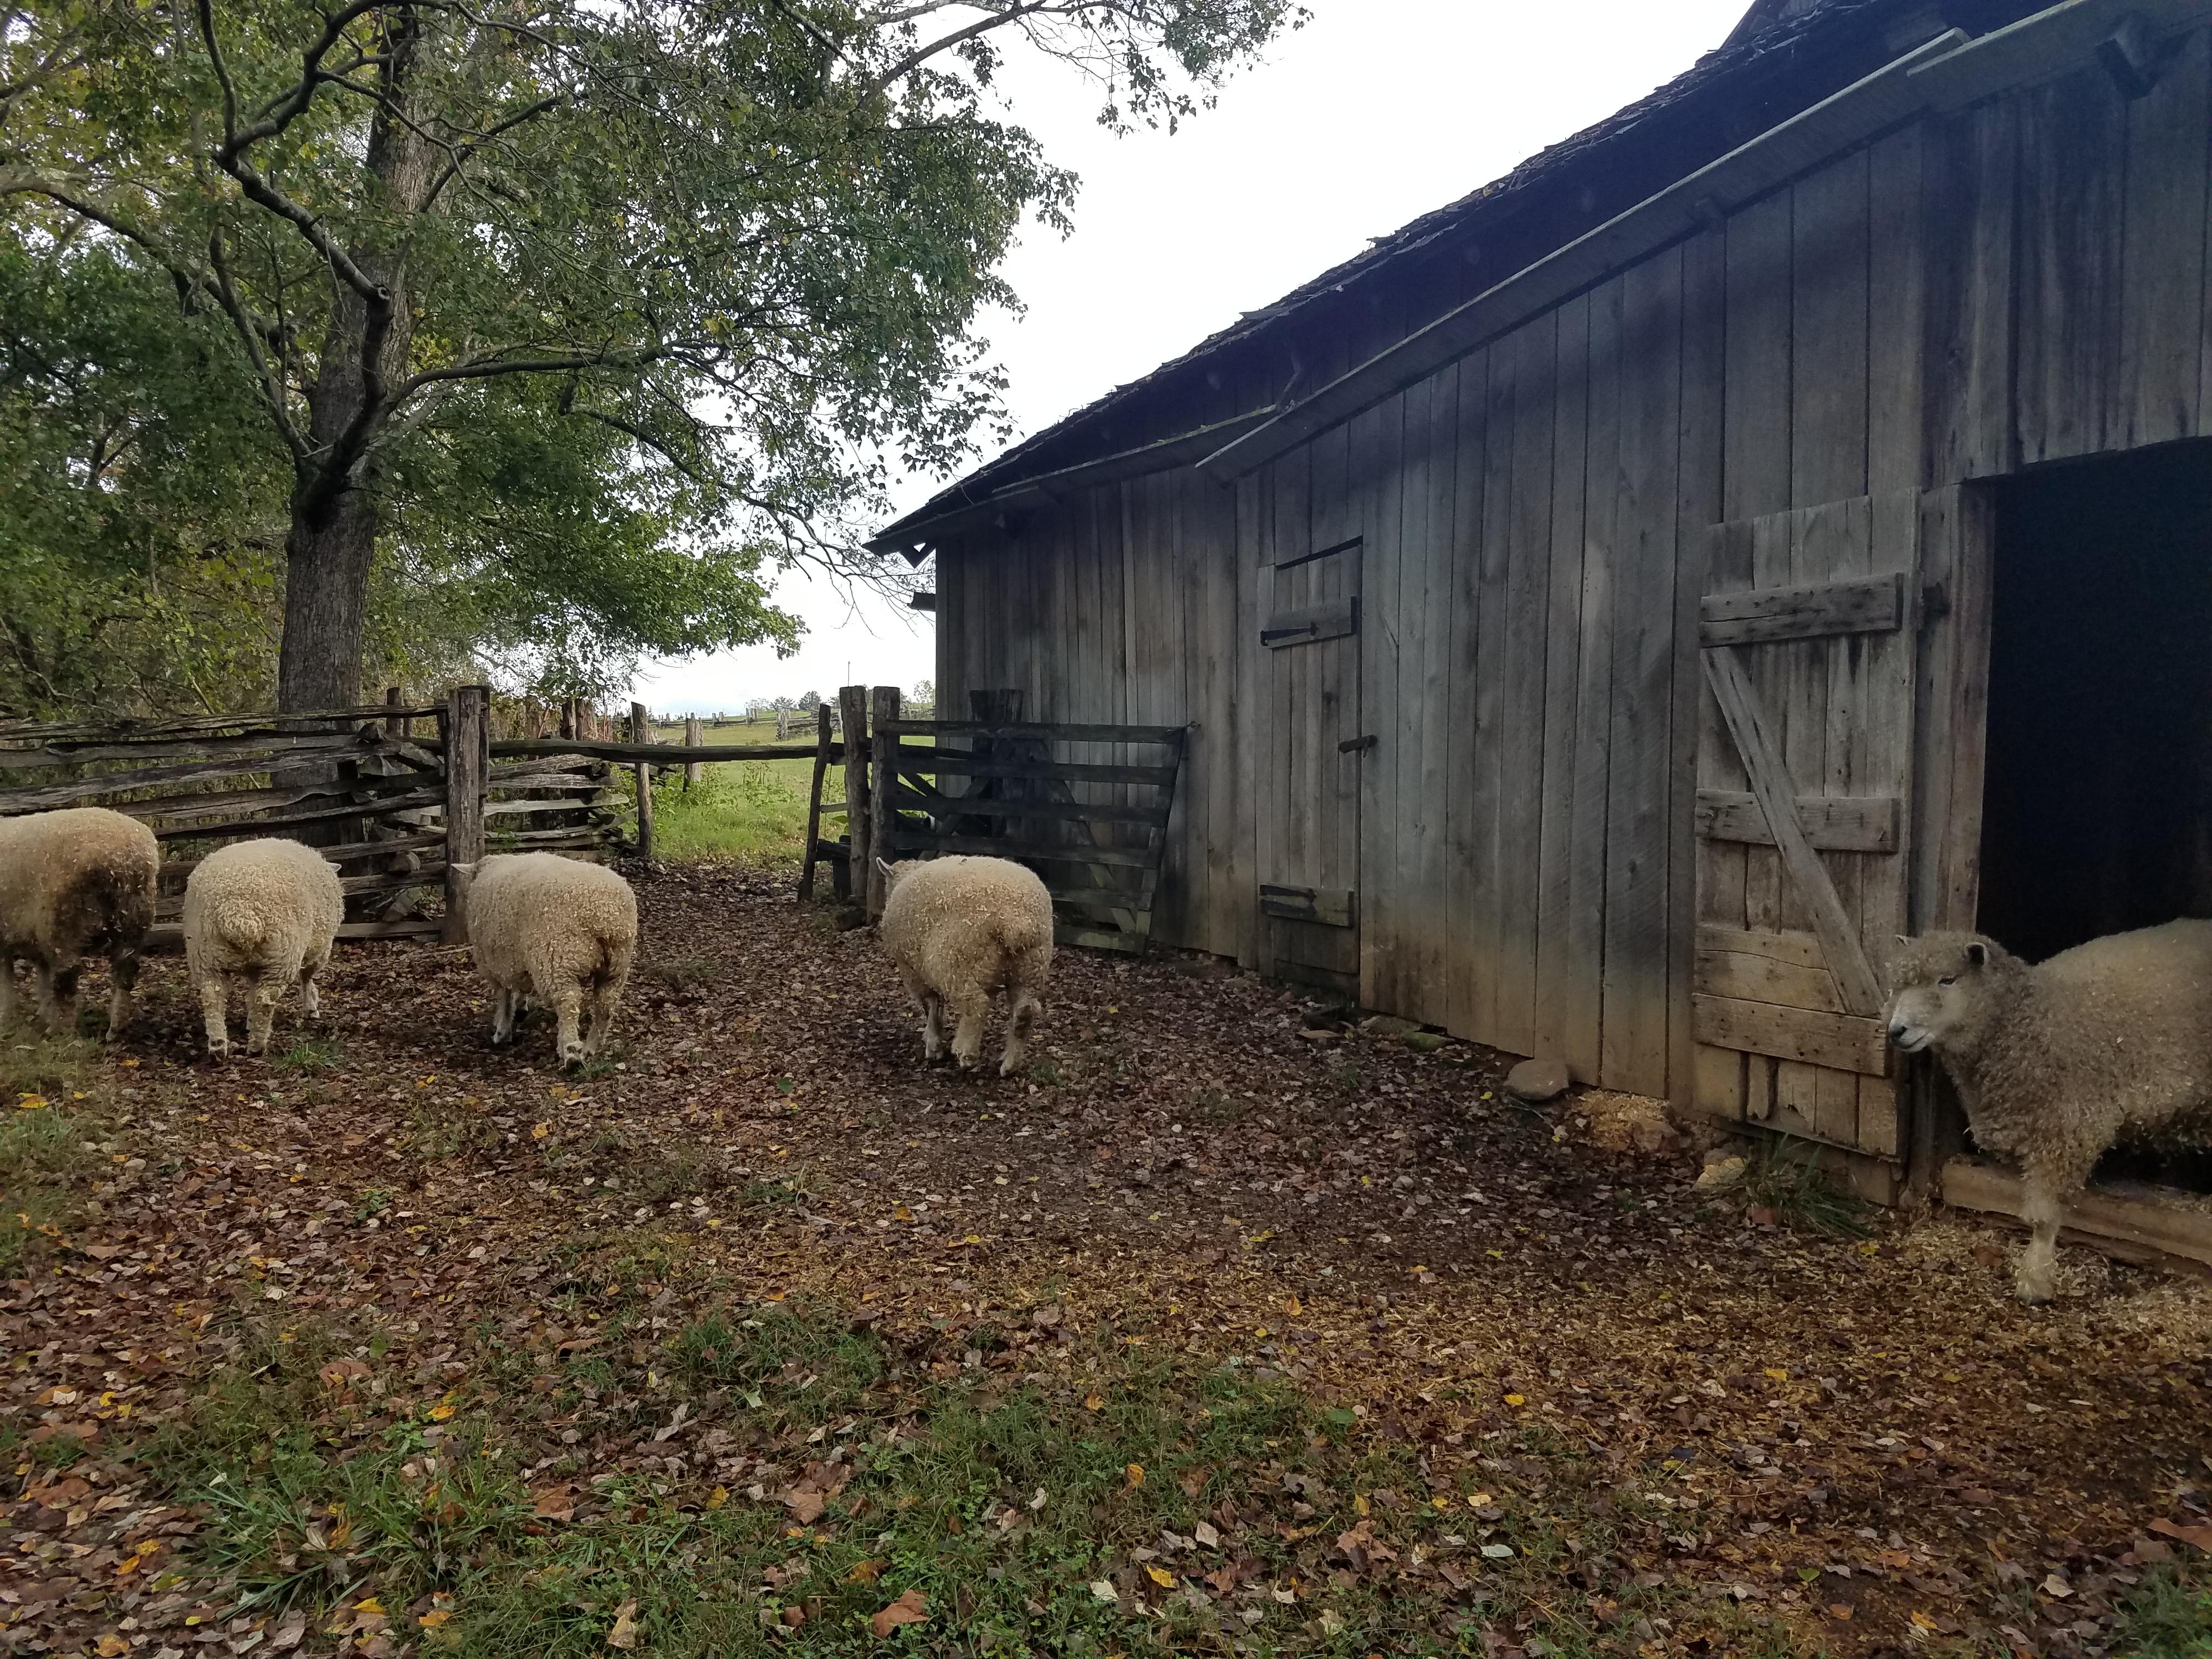 sheep coming out of barn